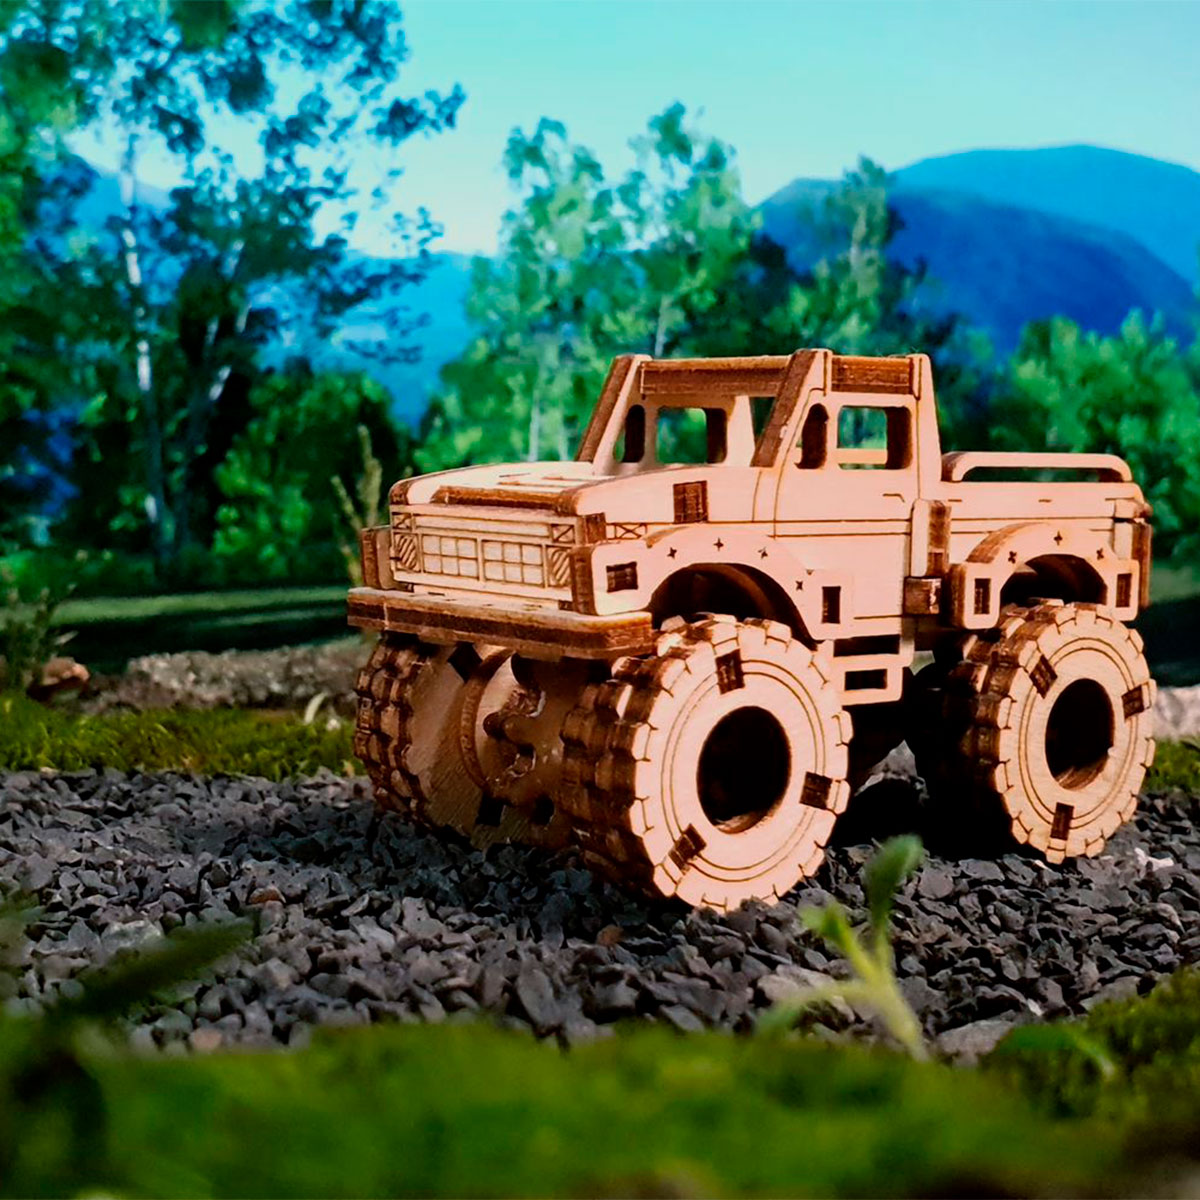 4WD RC Monster Truck – Wonder Gears 3D Puzzle